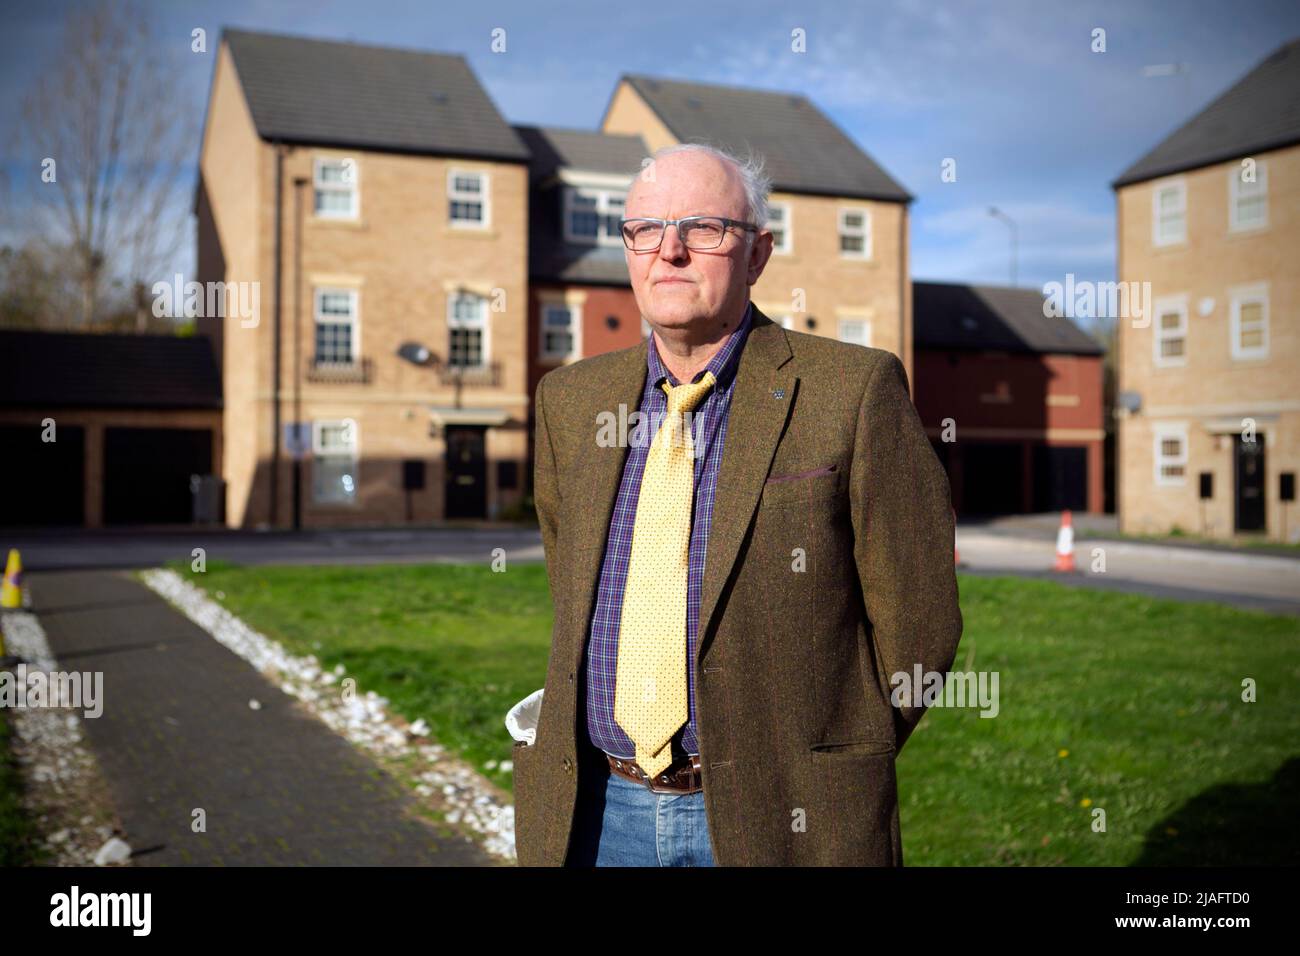 Andrew Pickering, Ward Councillor for Mexborough photographed on the Shimmer Housing Estate in the town of Mexborough near Doncaster in south Yorkshir Stock Photo